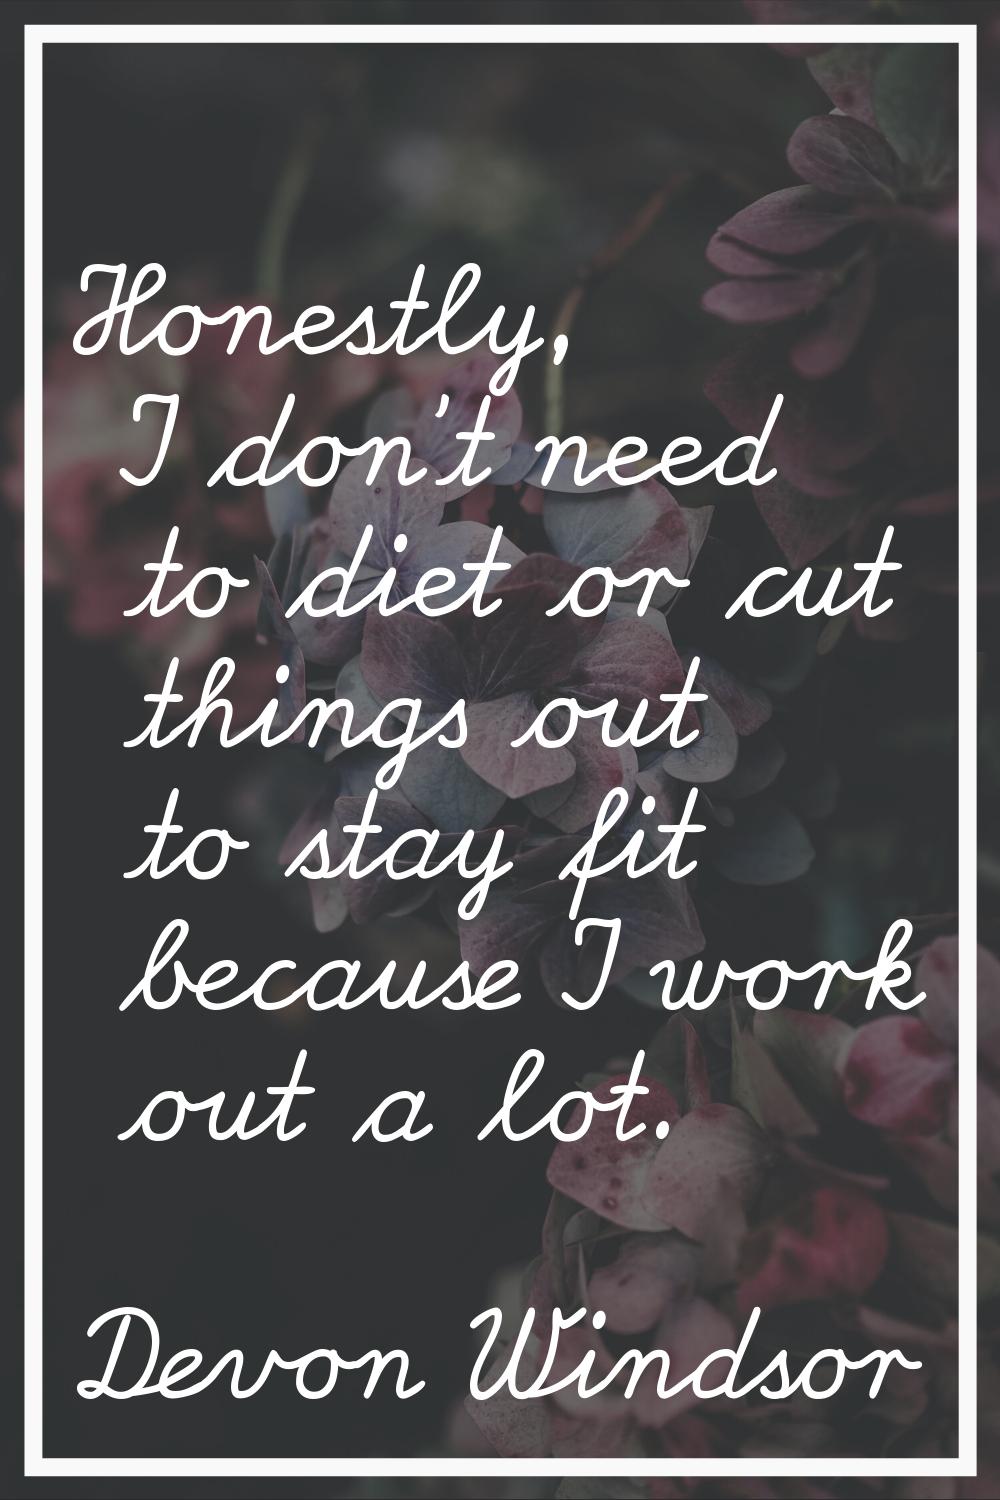 Honestly, I don't need to diet or cut things out to stay fit because I work out a lot.